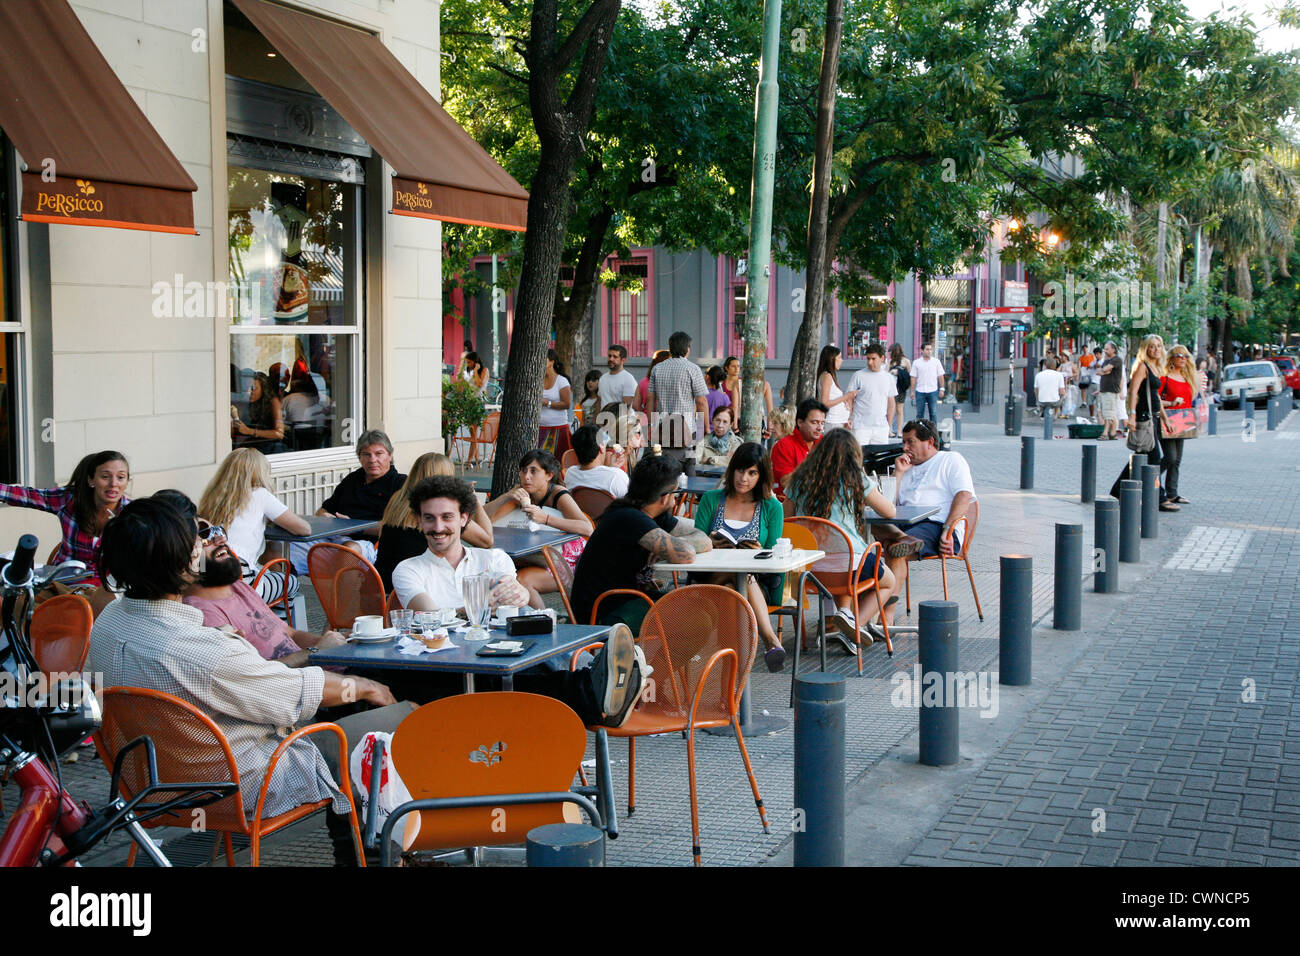 People sitting at an outdoors cafe in Palermo Soho, Buenos Aires, Argentina. Stock Photo